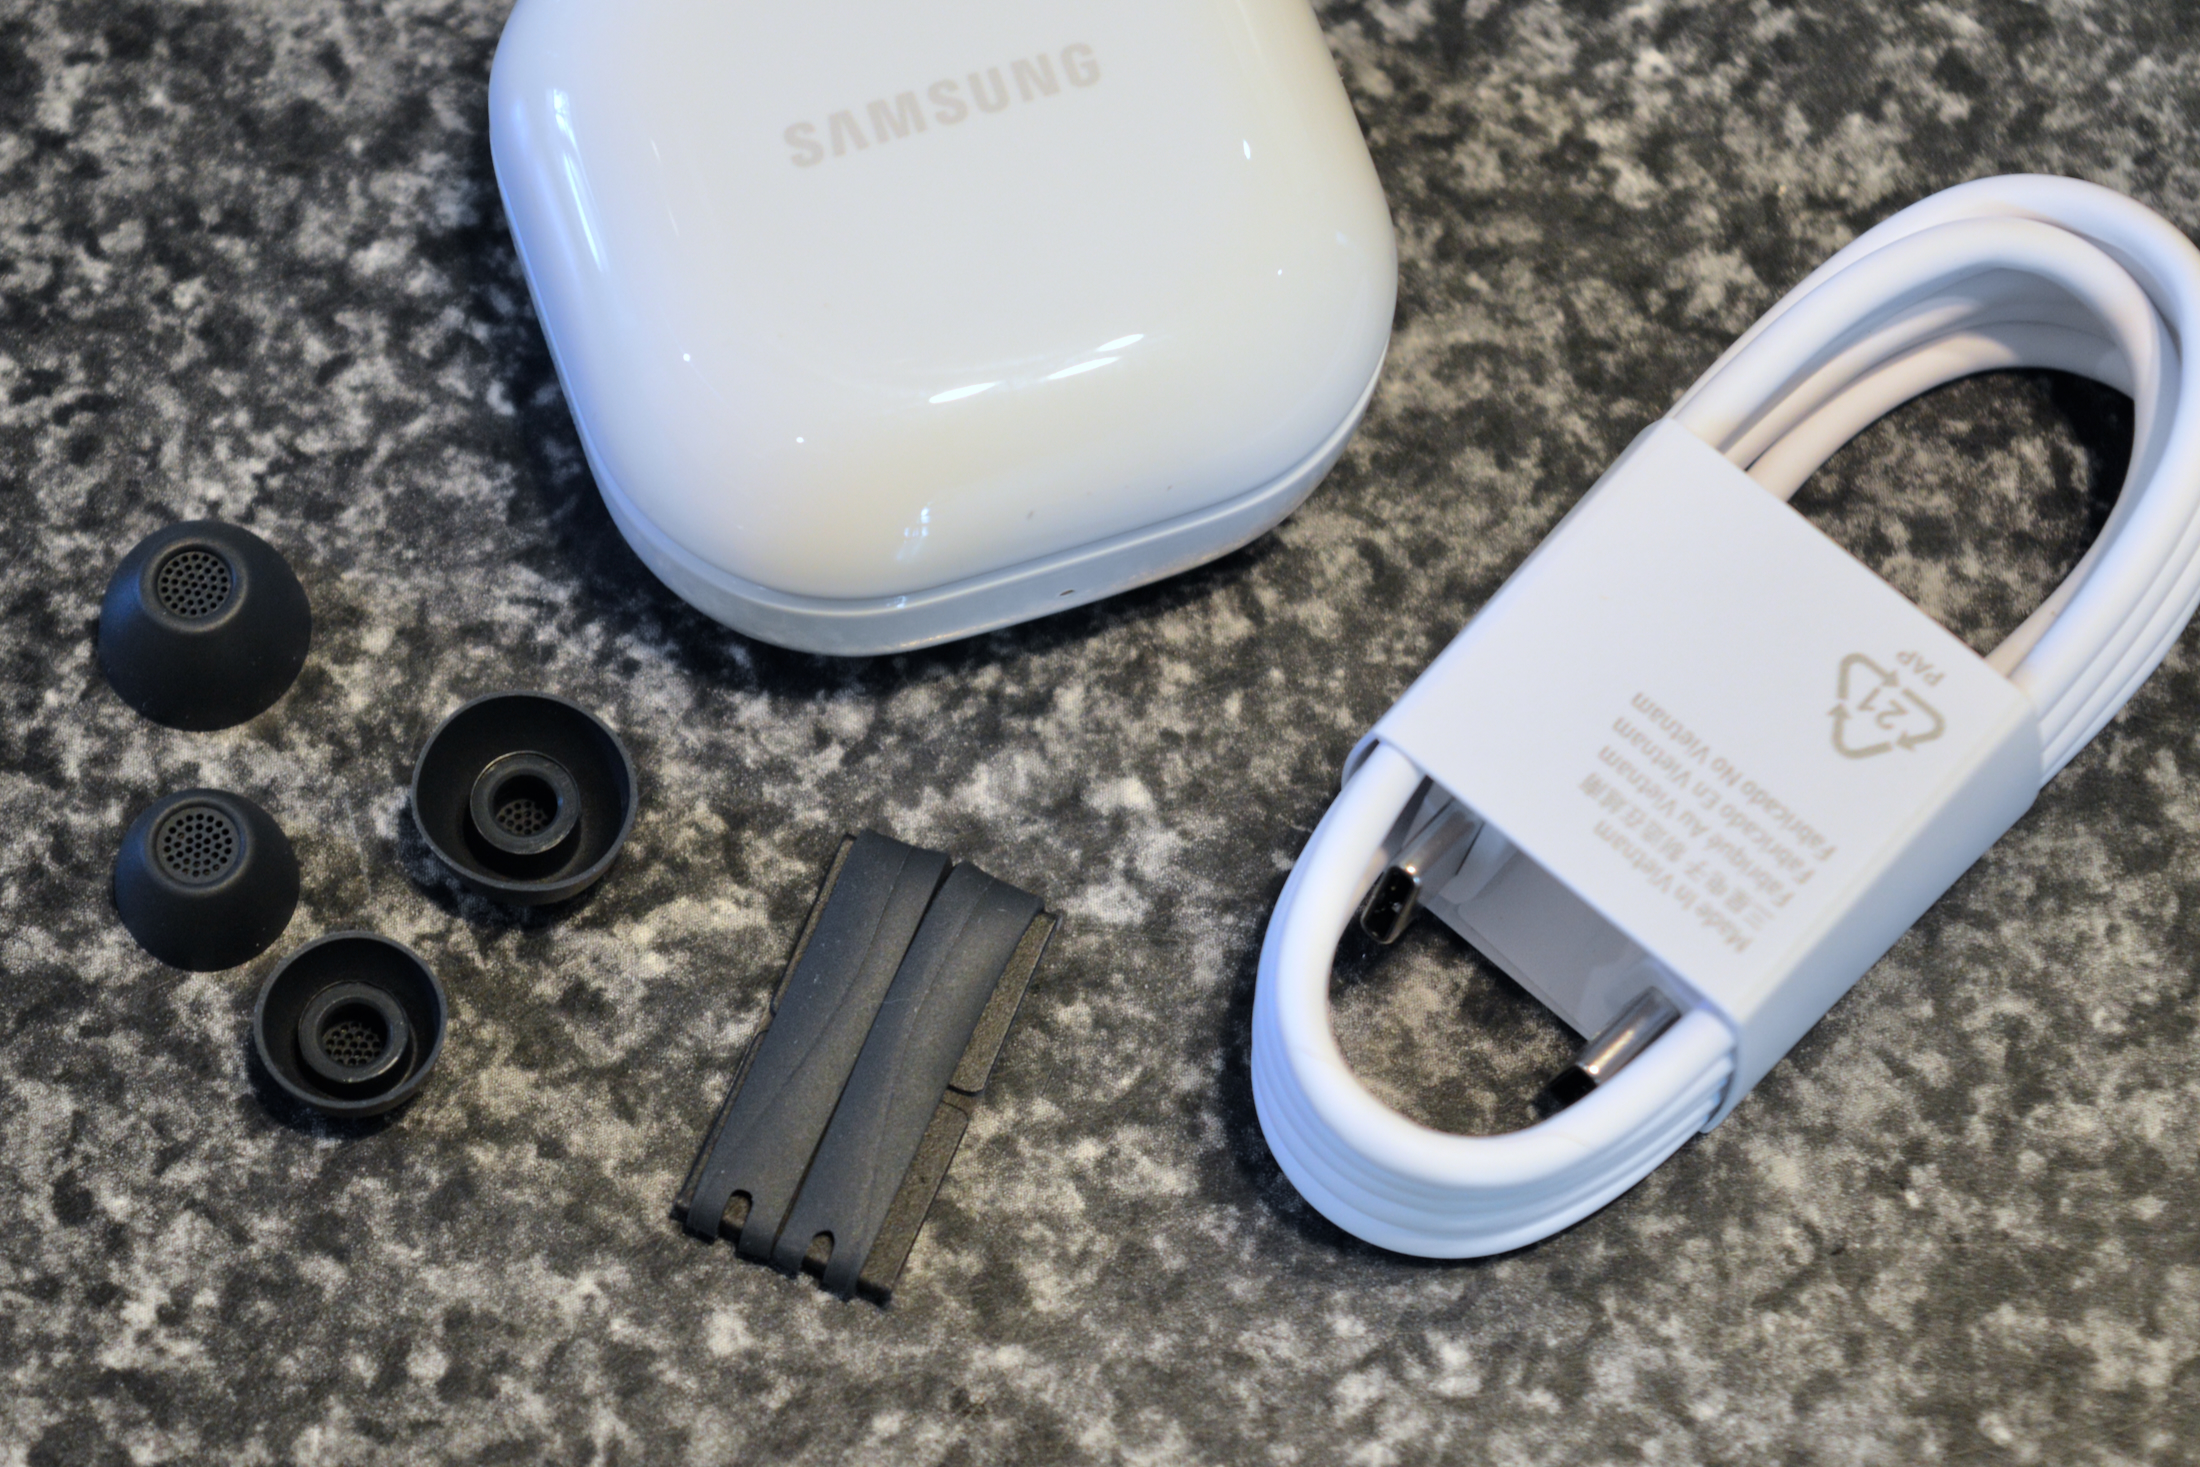 Samsung Galaxy Buds pro - Cell phones & accessories